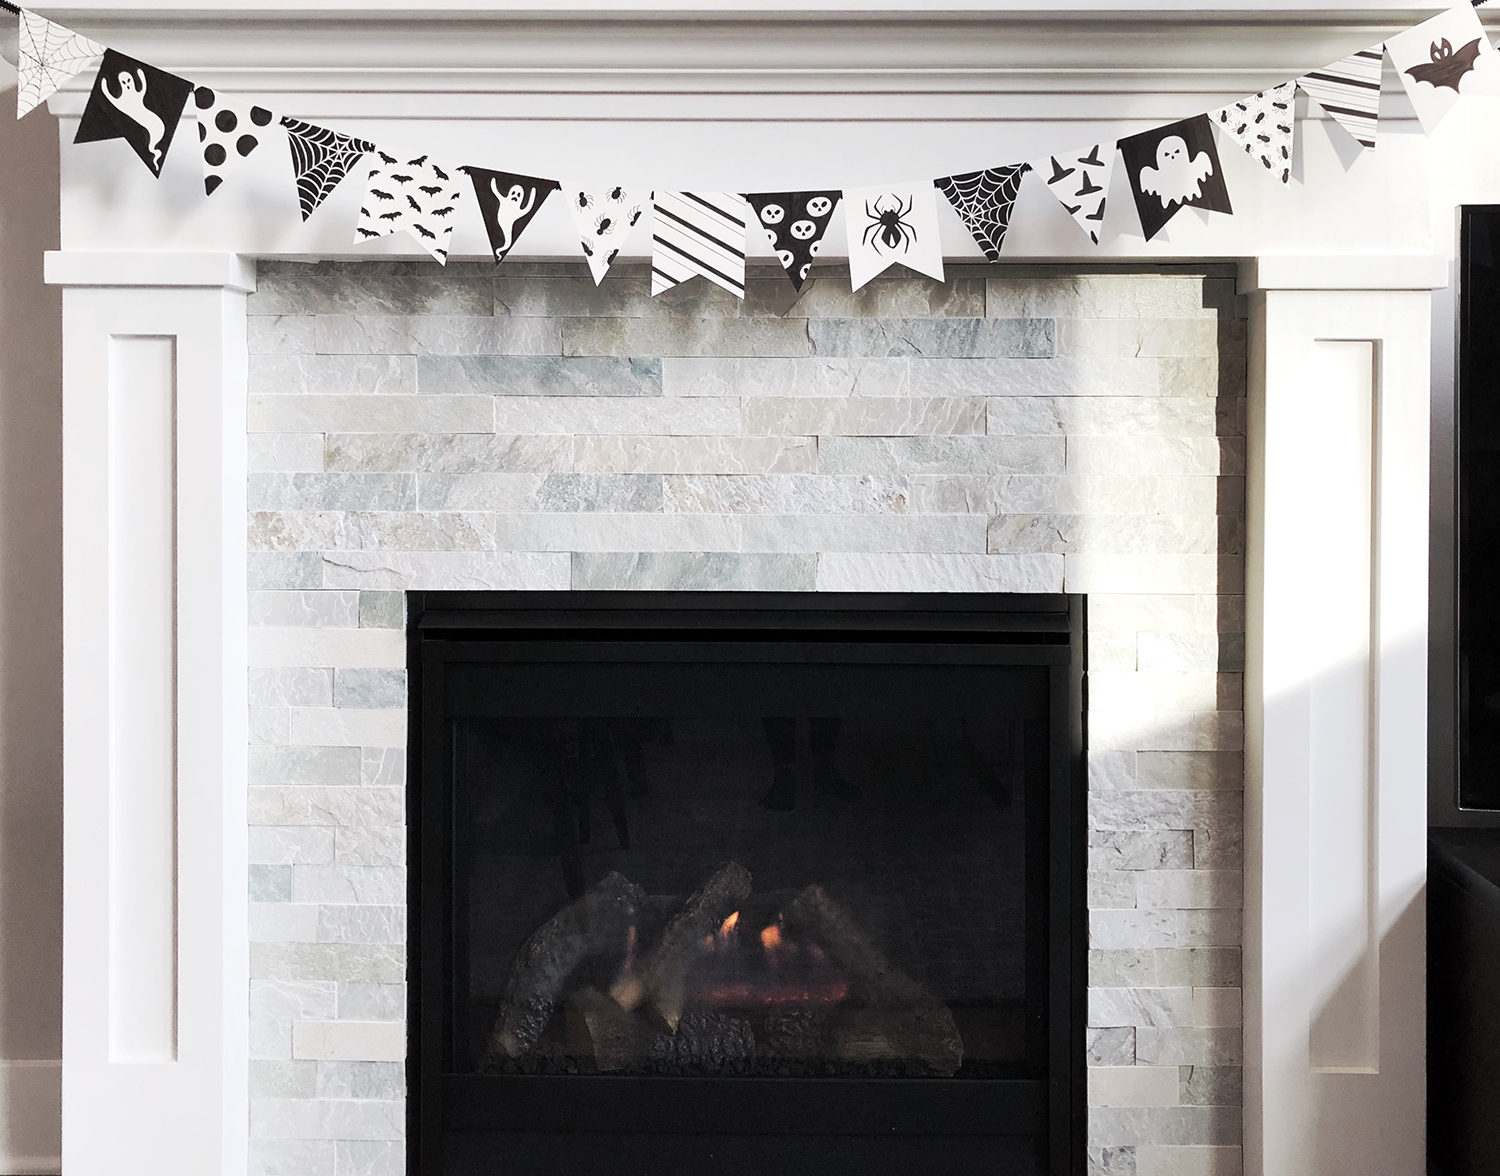 DIY Black and White Halloween Banner by Jessica Mack on behalf of Tombow